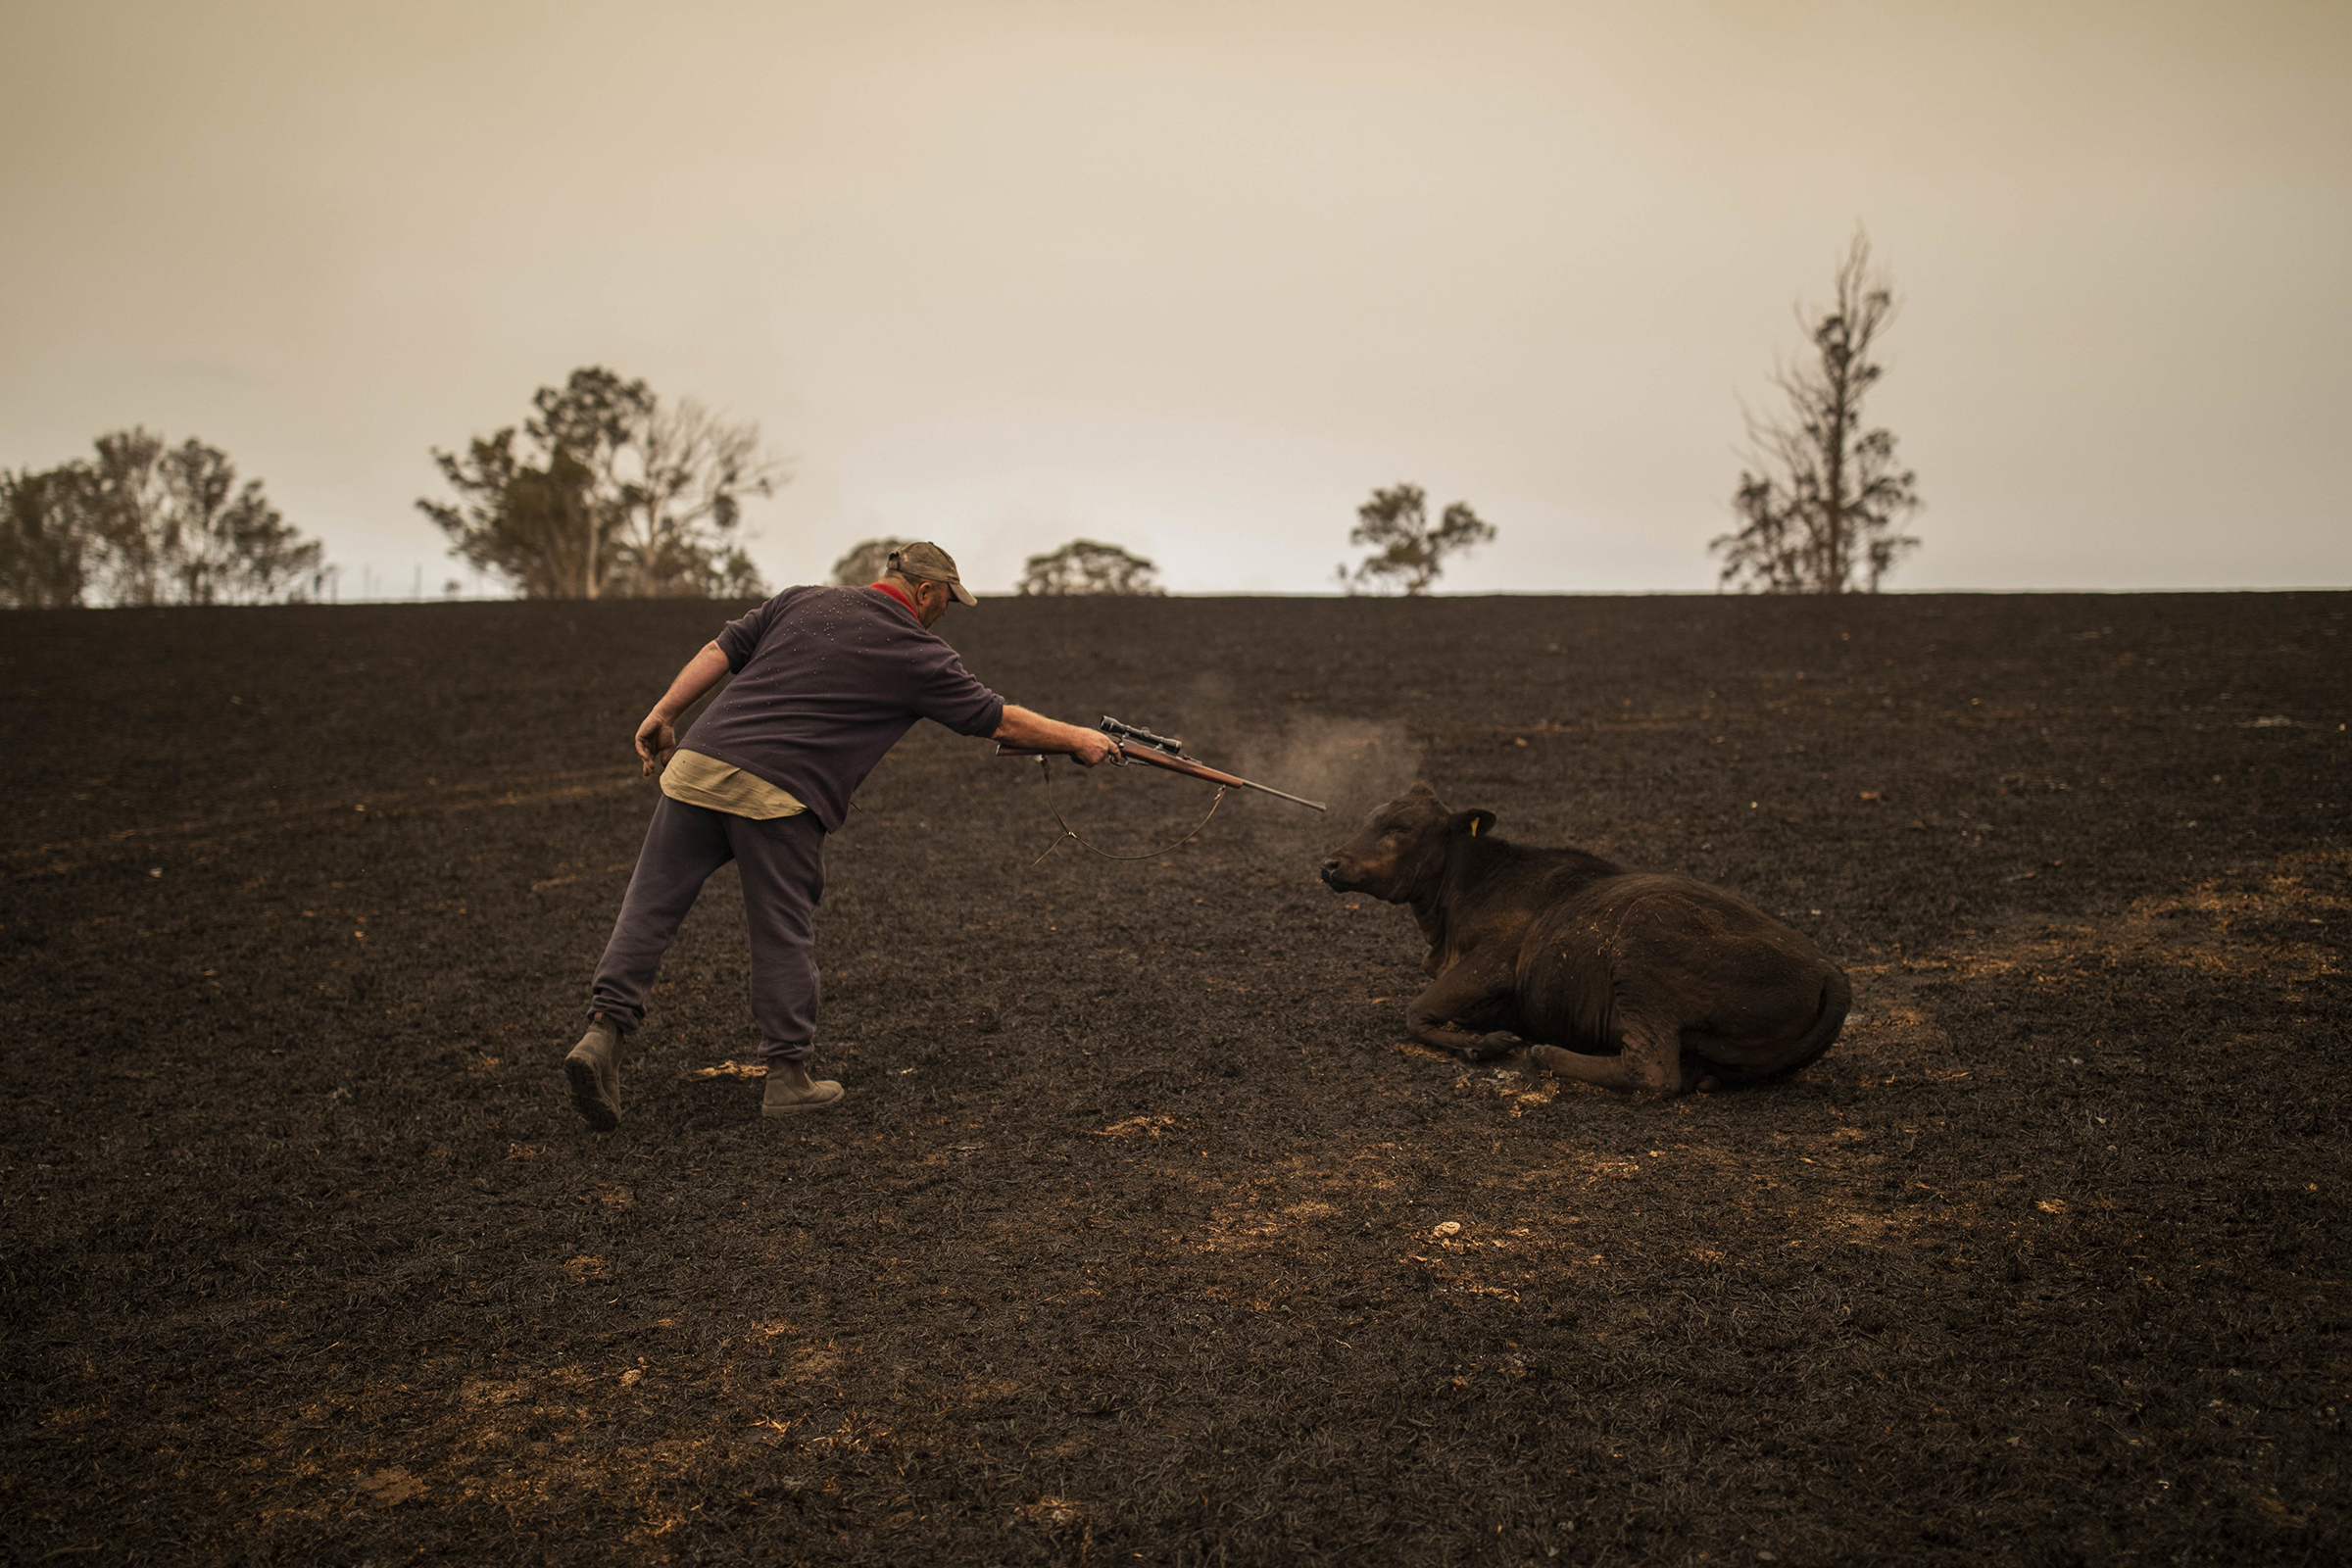 A resident puts down a cow that was severely wounded after a bushfire ravaged a paddock in Coolagolite, New South Wales, Australia, on Jan. 1, 2020.